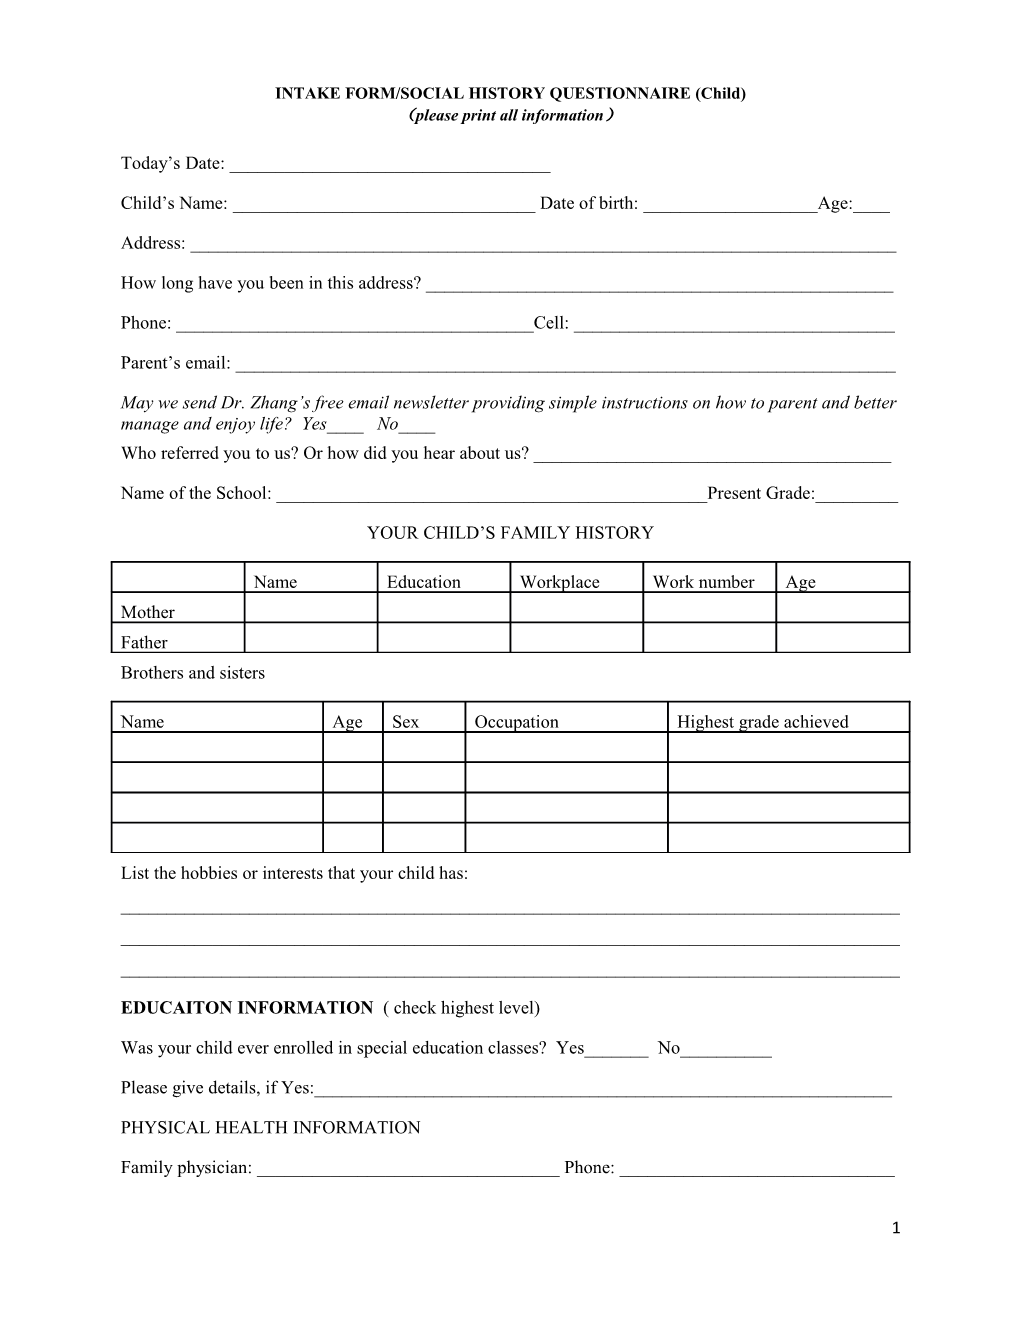 INTAKE FORM/SOCIAL HISTORY QUESTIONNAIRE (Child)